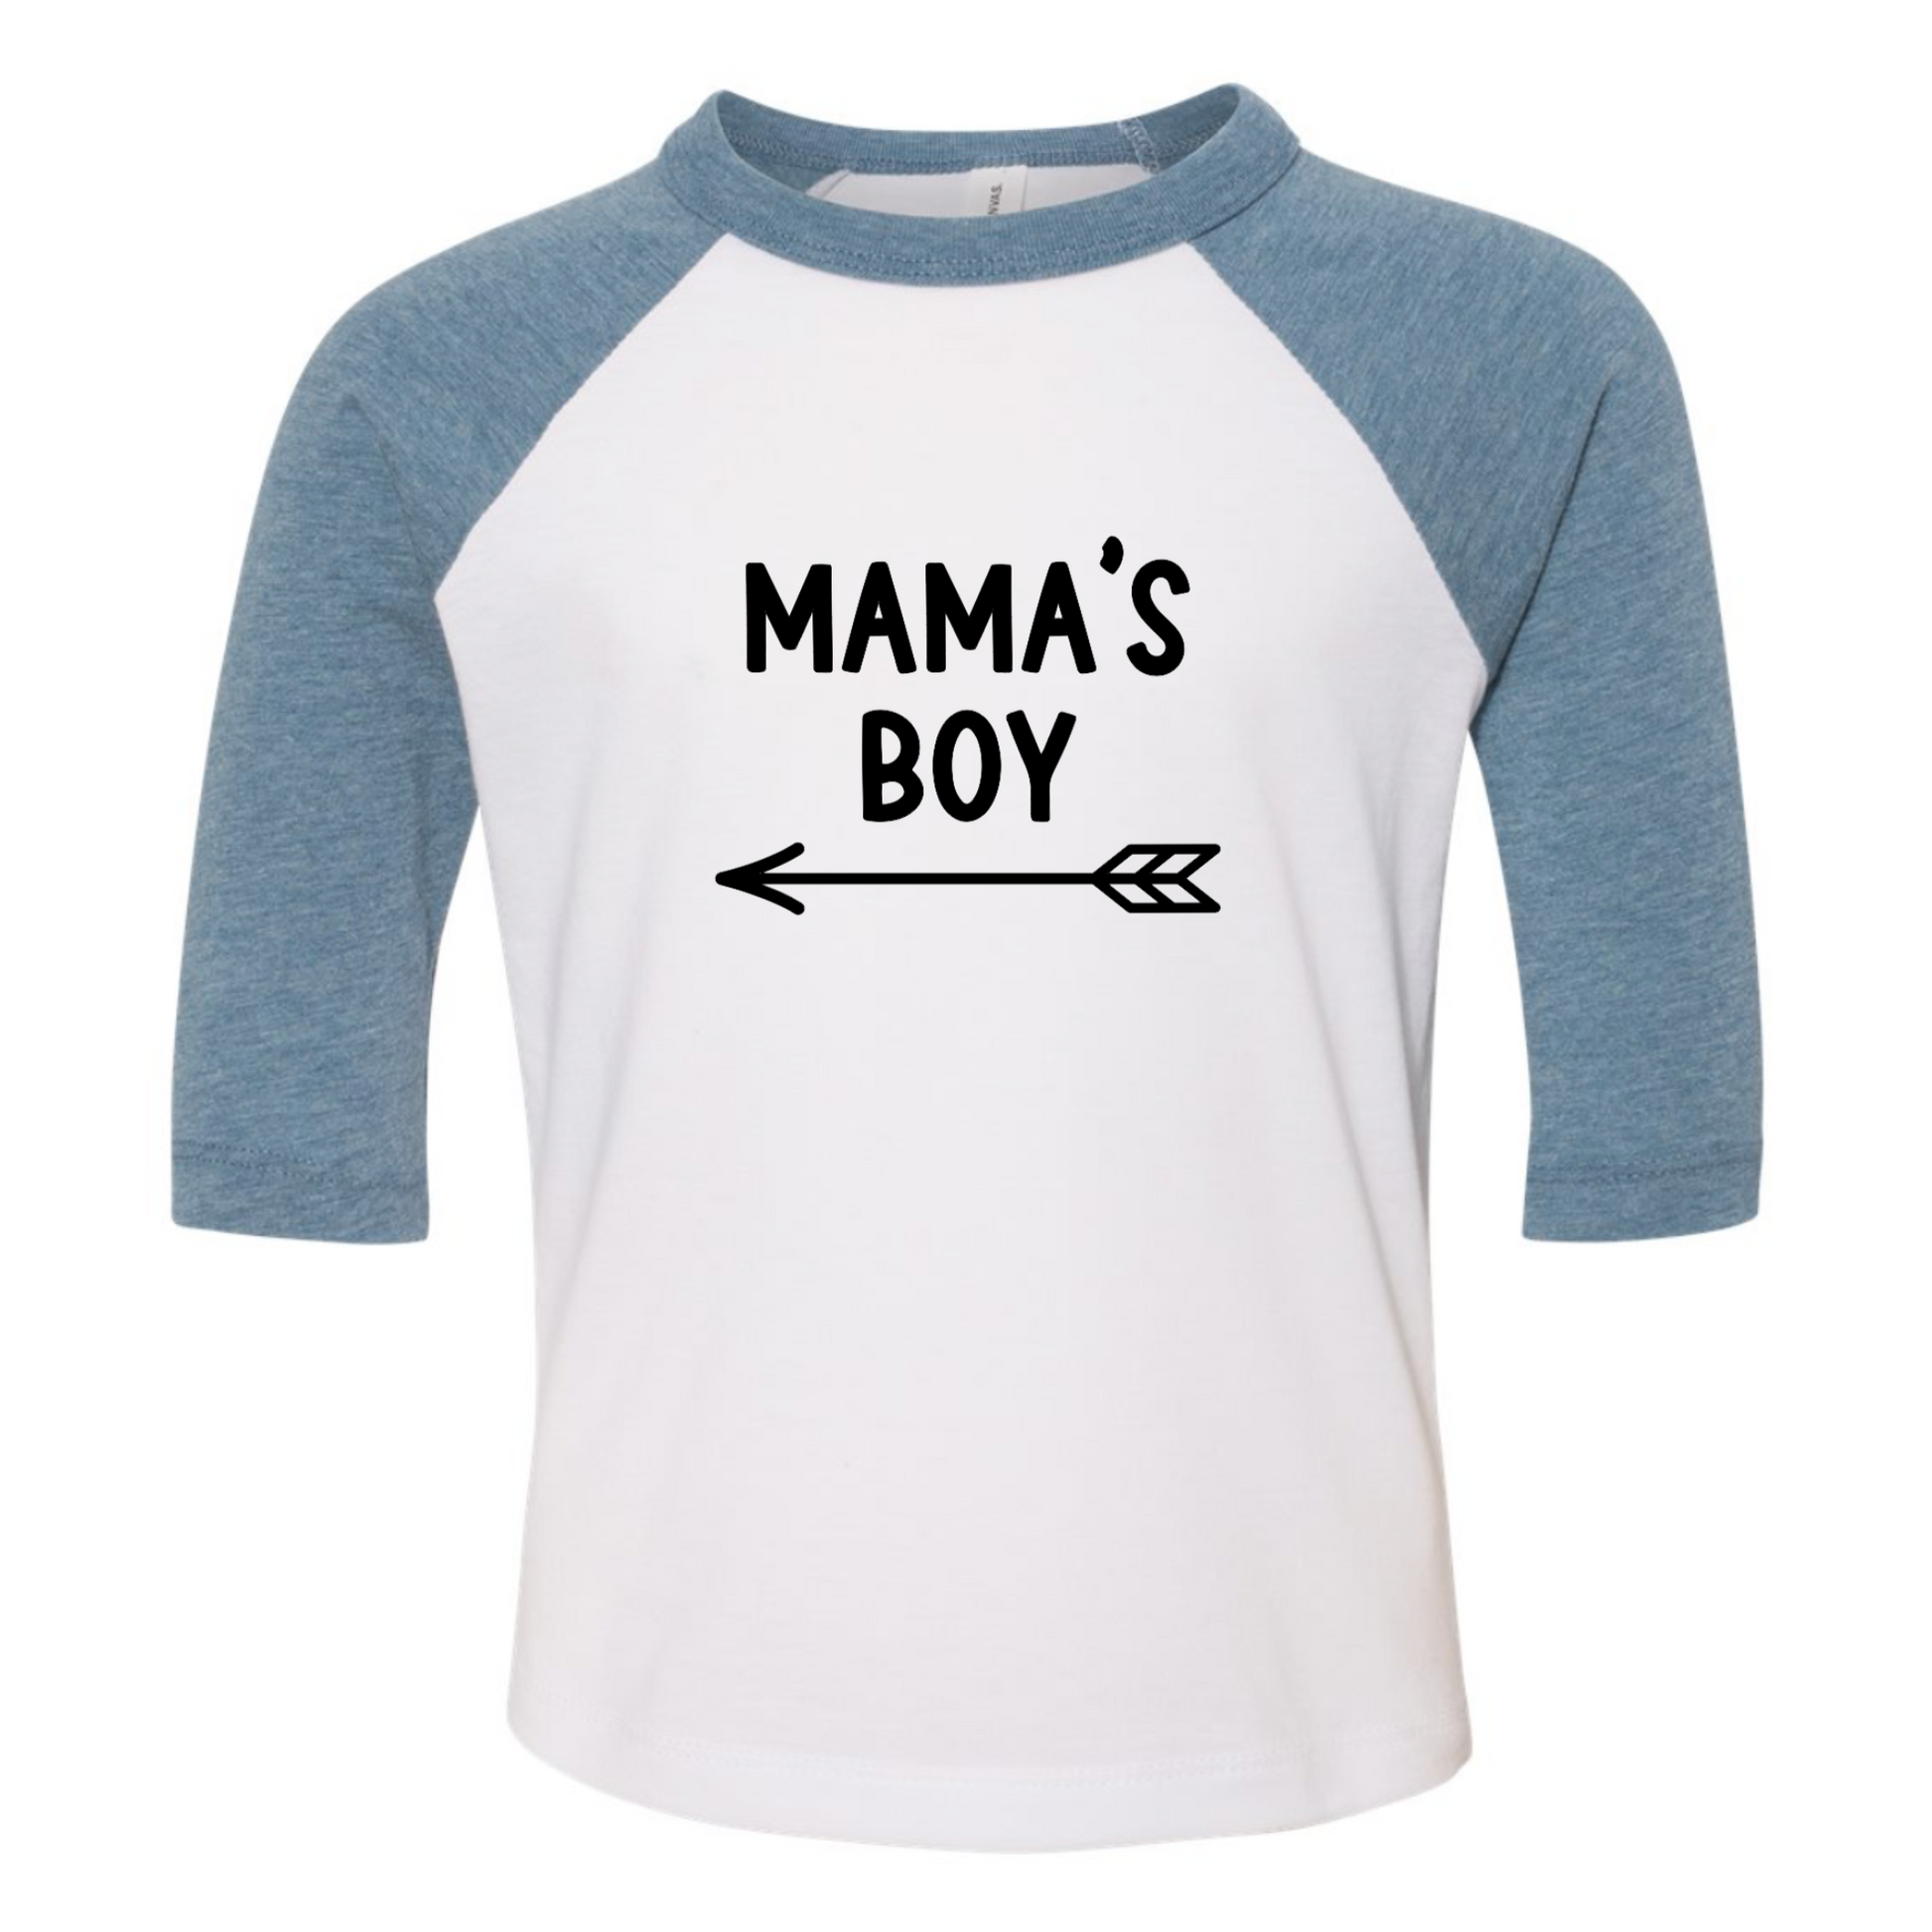 Mama's Boy - Three Quarter Baseball T-Shirt. Sleeves in a Heather light blue on the sleeves with a white base. Mama's Boy is in black with an arrow below it pointing to the left. This is the front view of the shirt.